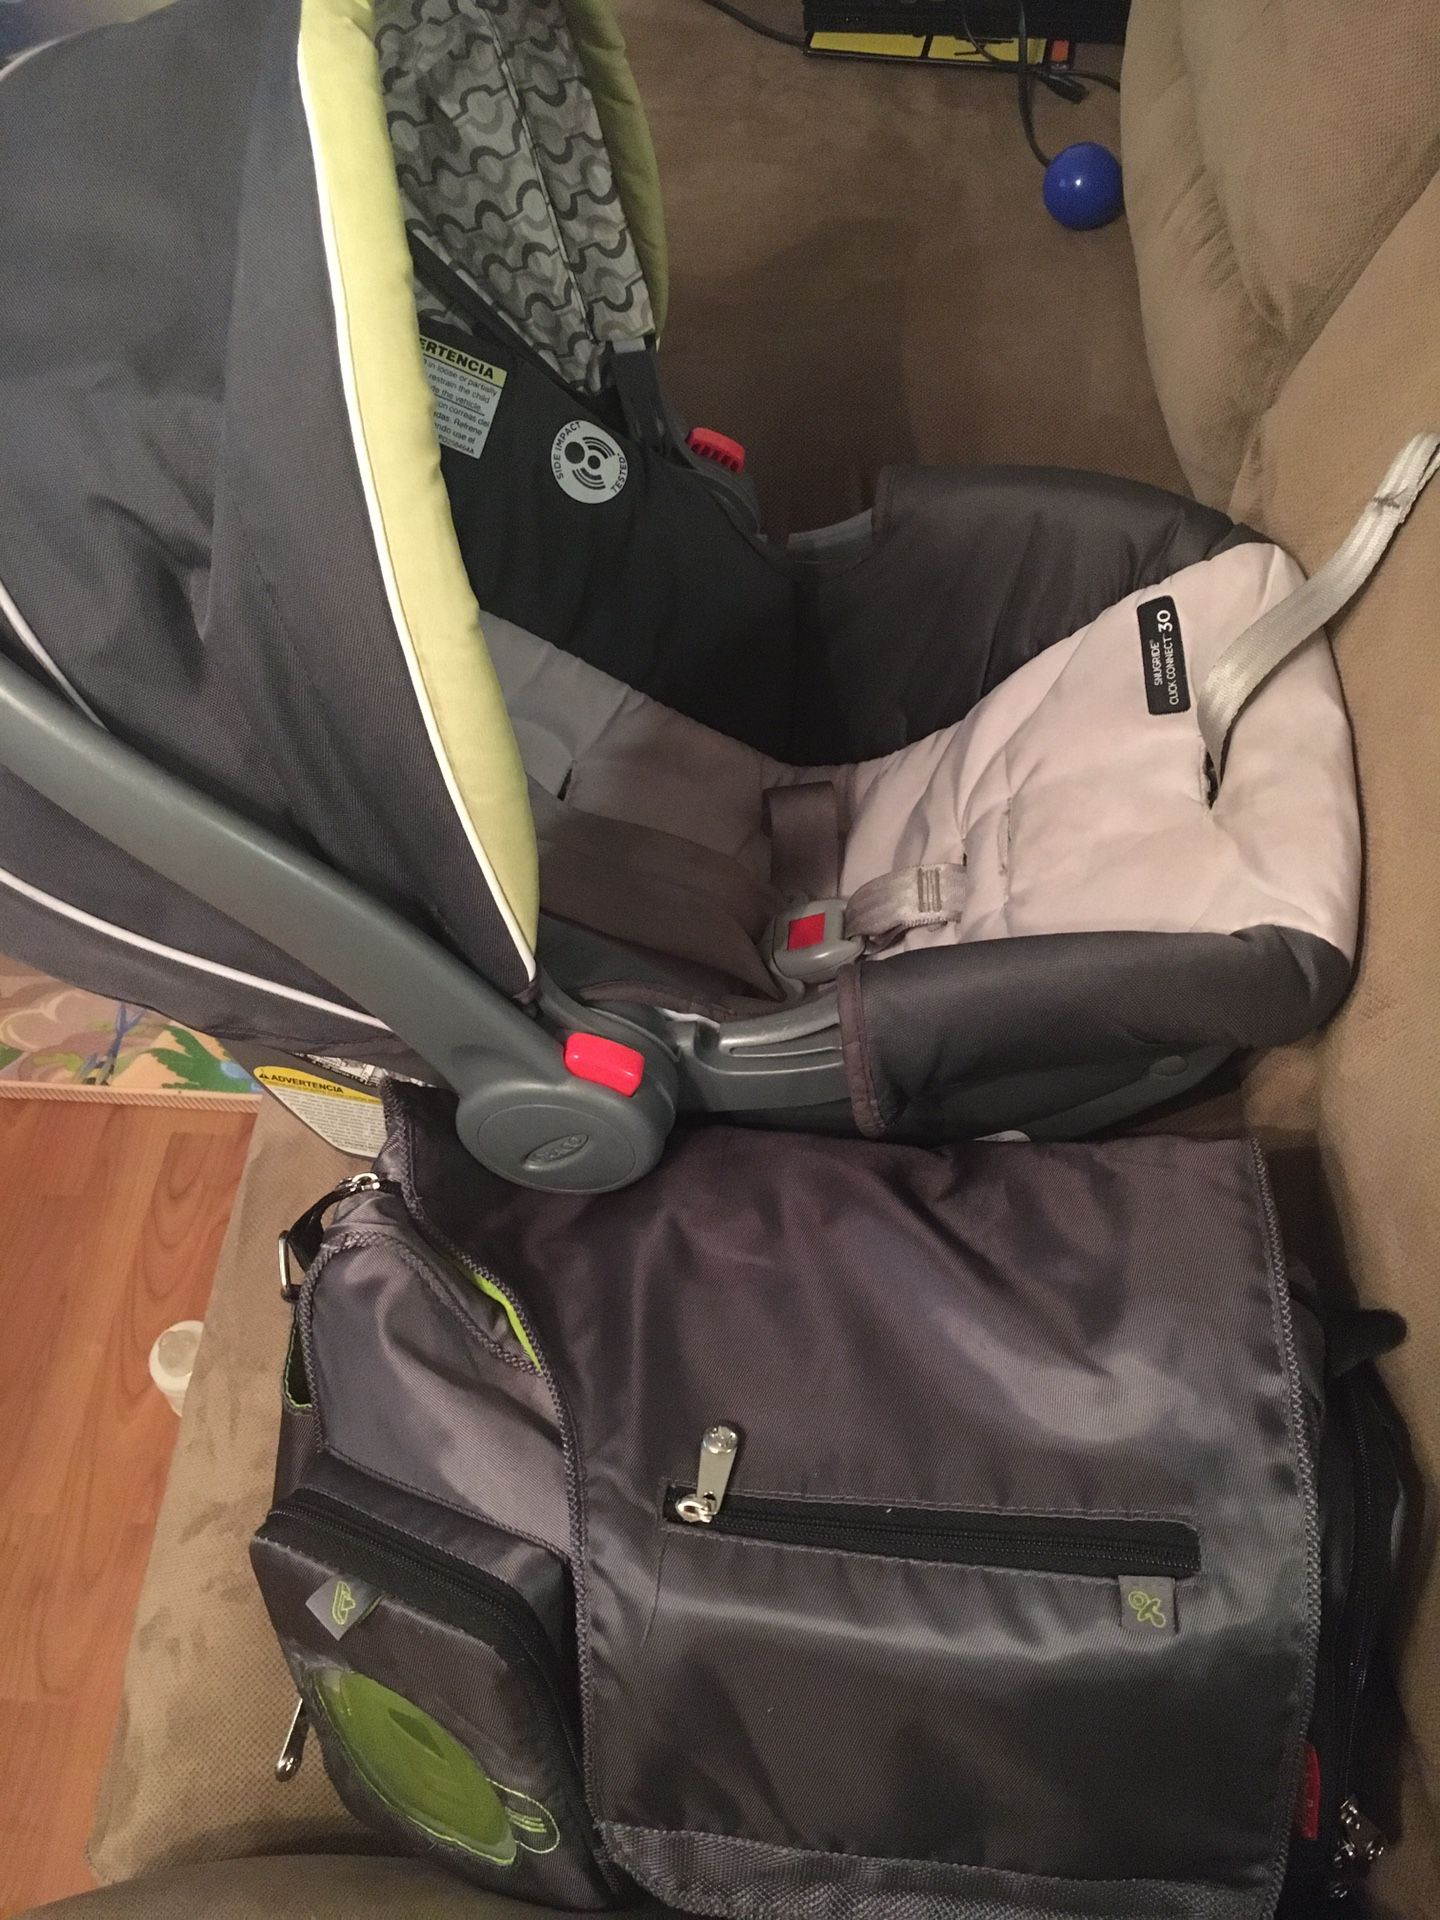 Used car seat and baby bag